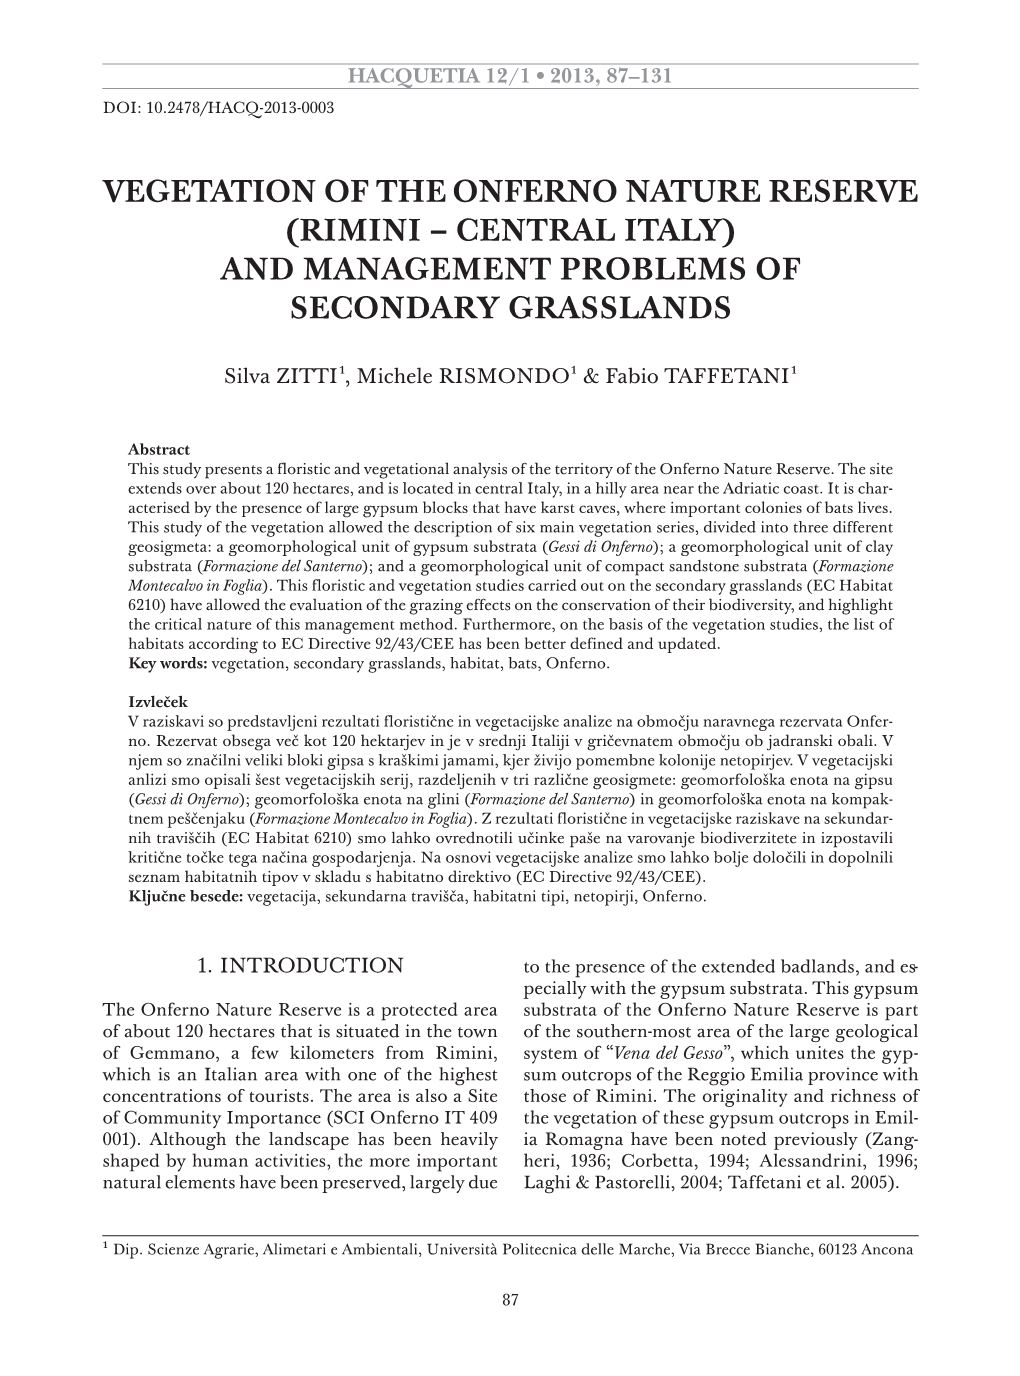 Vegetation of the Onferno Nature Reserve (Rimini – CENTRAL ITALY) and Management Problems of Secondary Grasslands